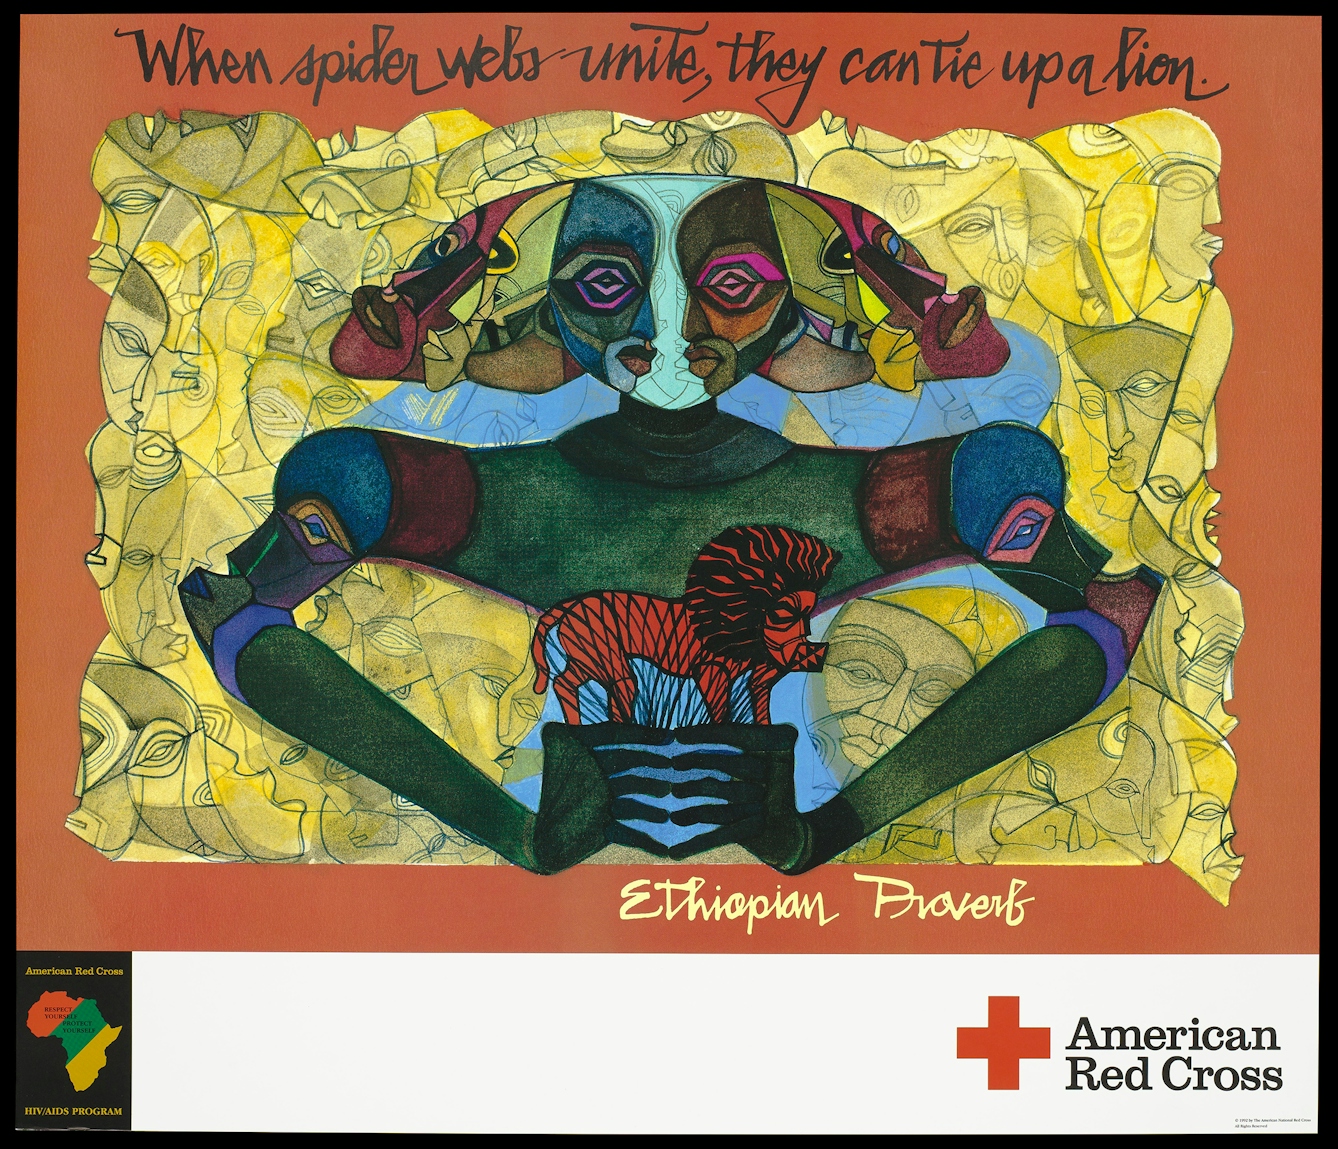 Two figures made up of African masks facine each other and merging into one. The arms and hands come together to hold a red male lion in the centre. Above the image is an Ethiopian proverb: "When spider webs unite, they can tie up a lion in a web of strings. Aat the bottom of the poster is a map of Africa and the text "American Red Cross. HIV/AIDS Program".